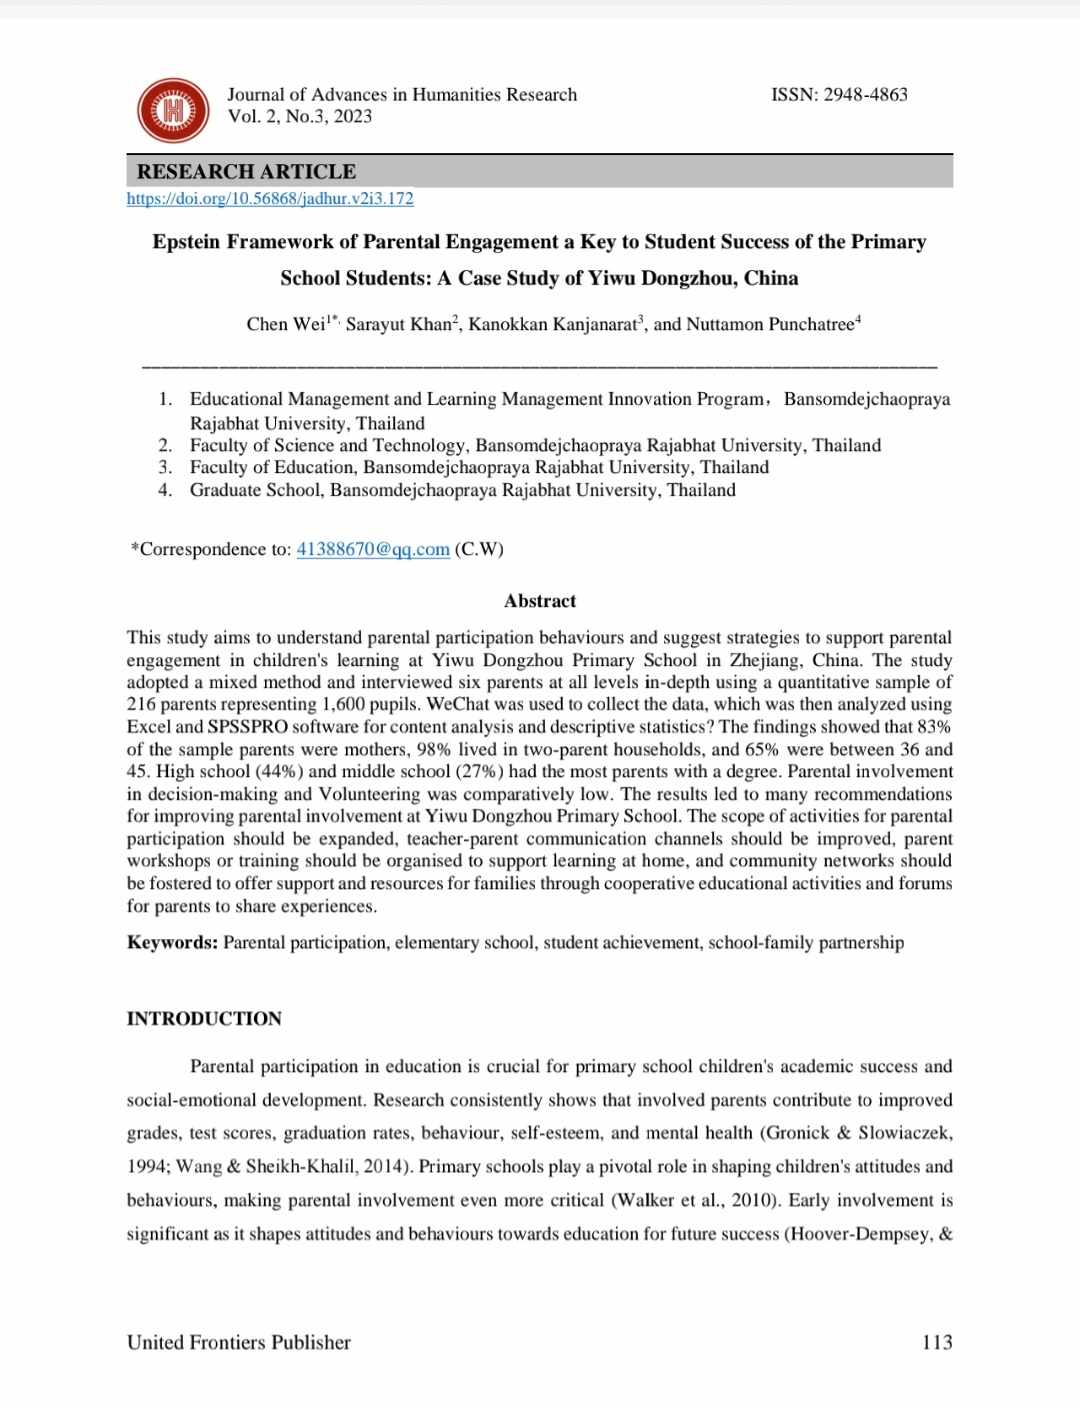 Epstein Framework of Parental Engagement a Key to Student Success of the Primary School Students: A Case Study of Yiwu Dongzhou, China